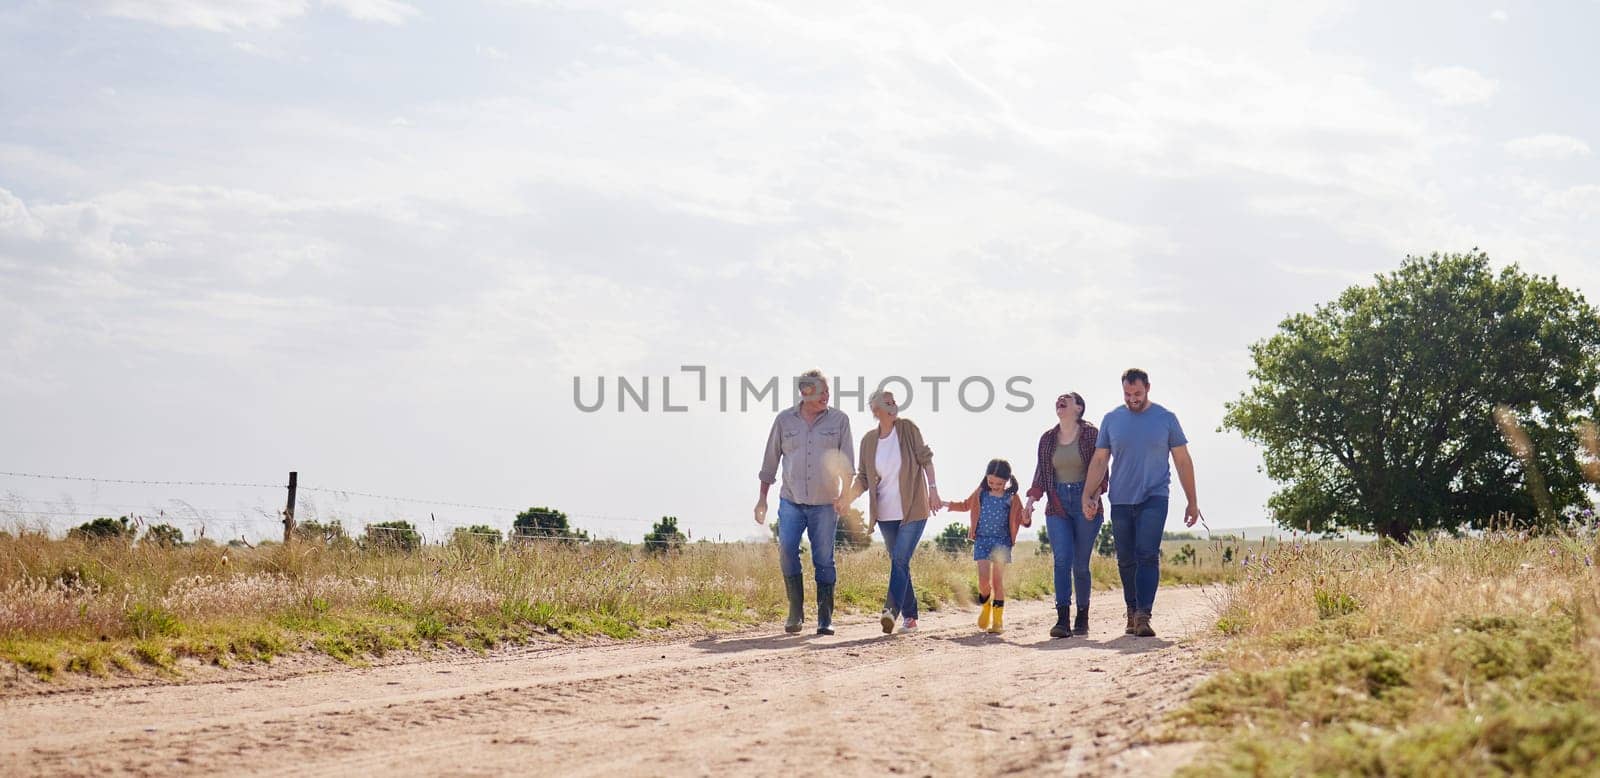 Love, happy family walking holding hands and on a farm with blue sky. Support or care, happiness or agriculture and people walk outdoors by countryside or rural environment together with generation.